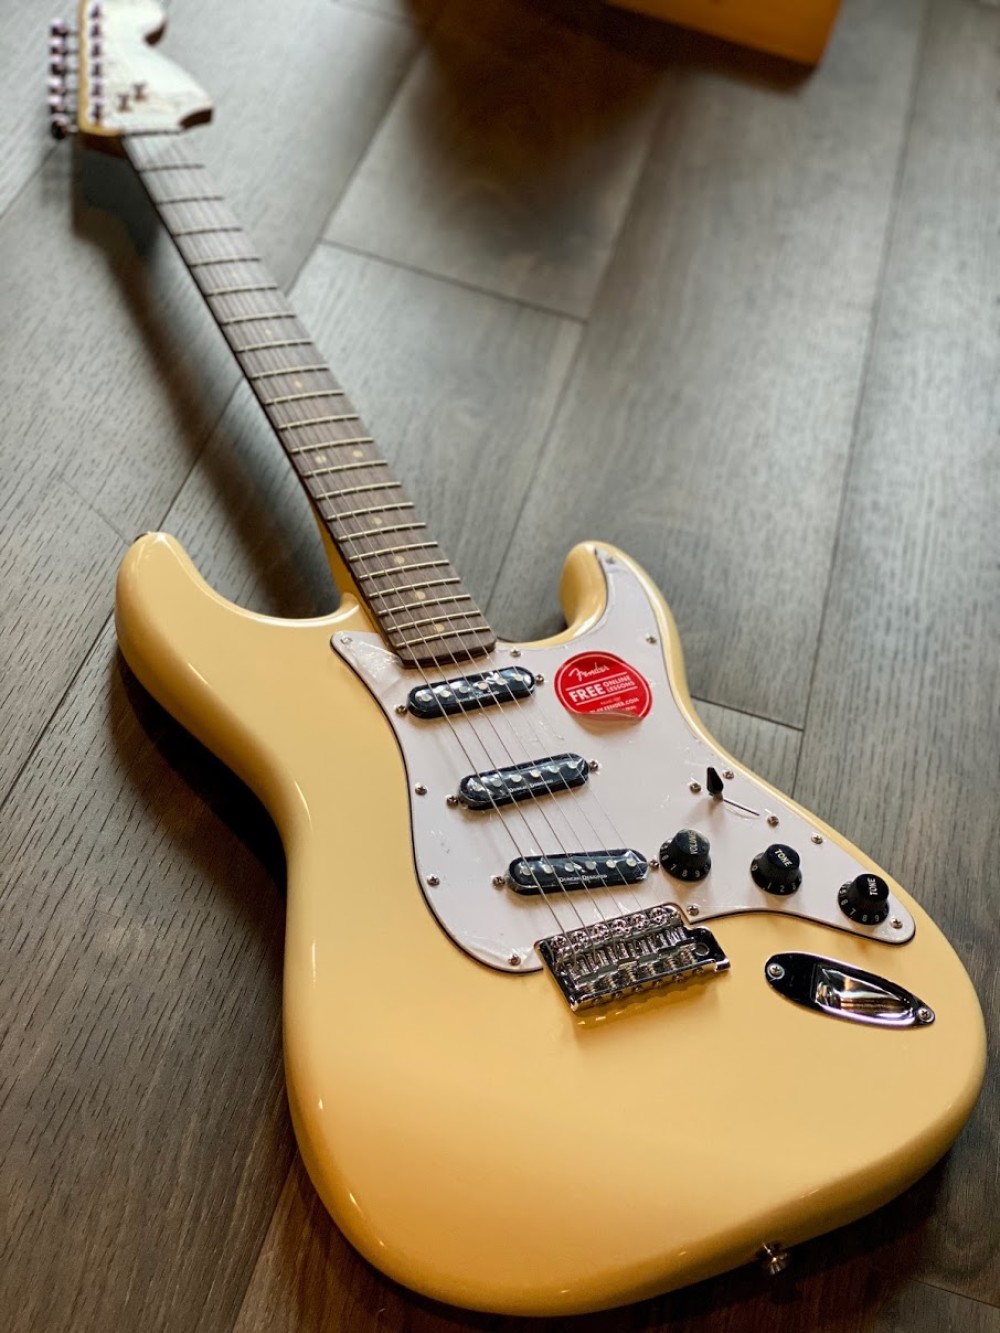 Squier Vintage modified stratcaster-